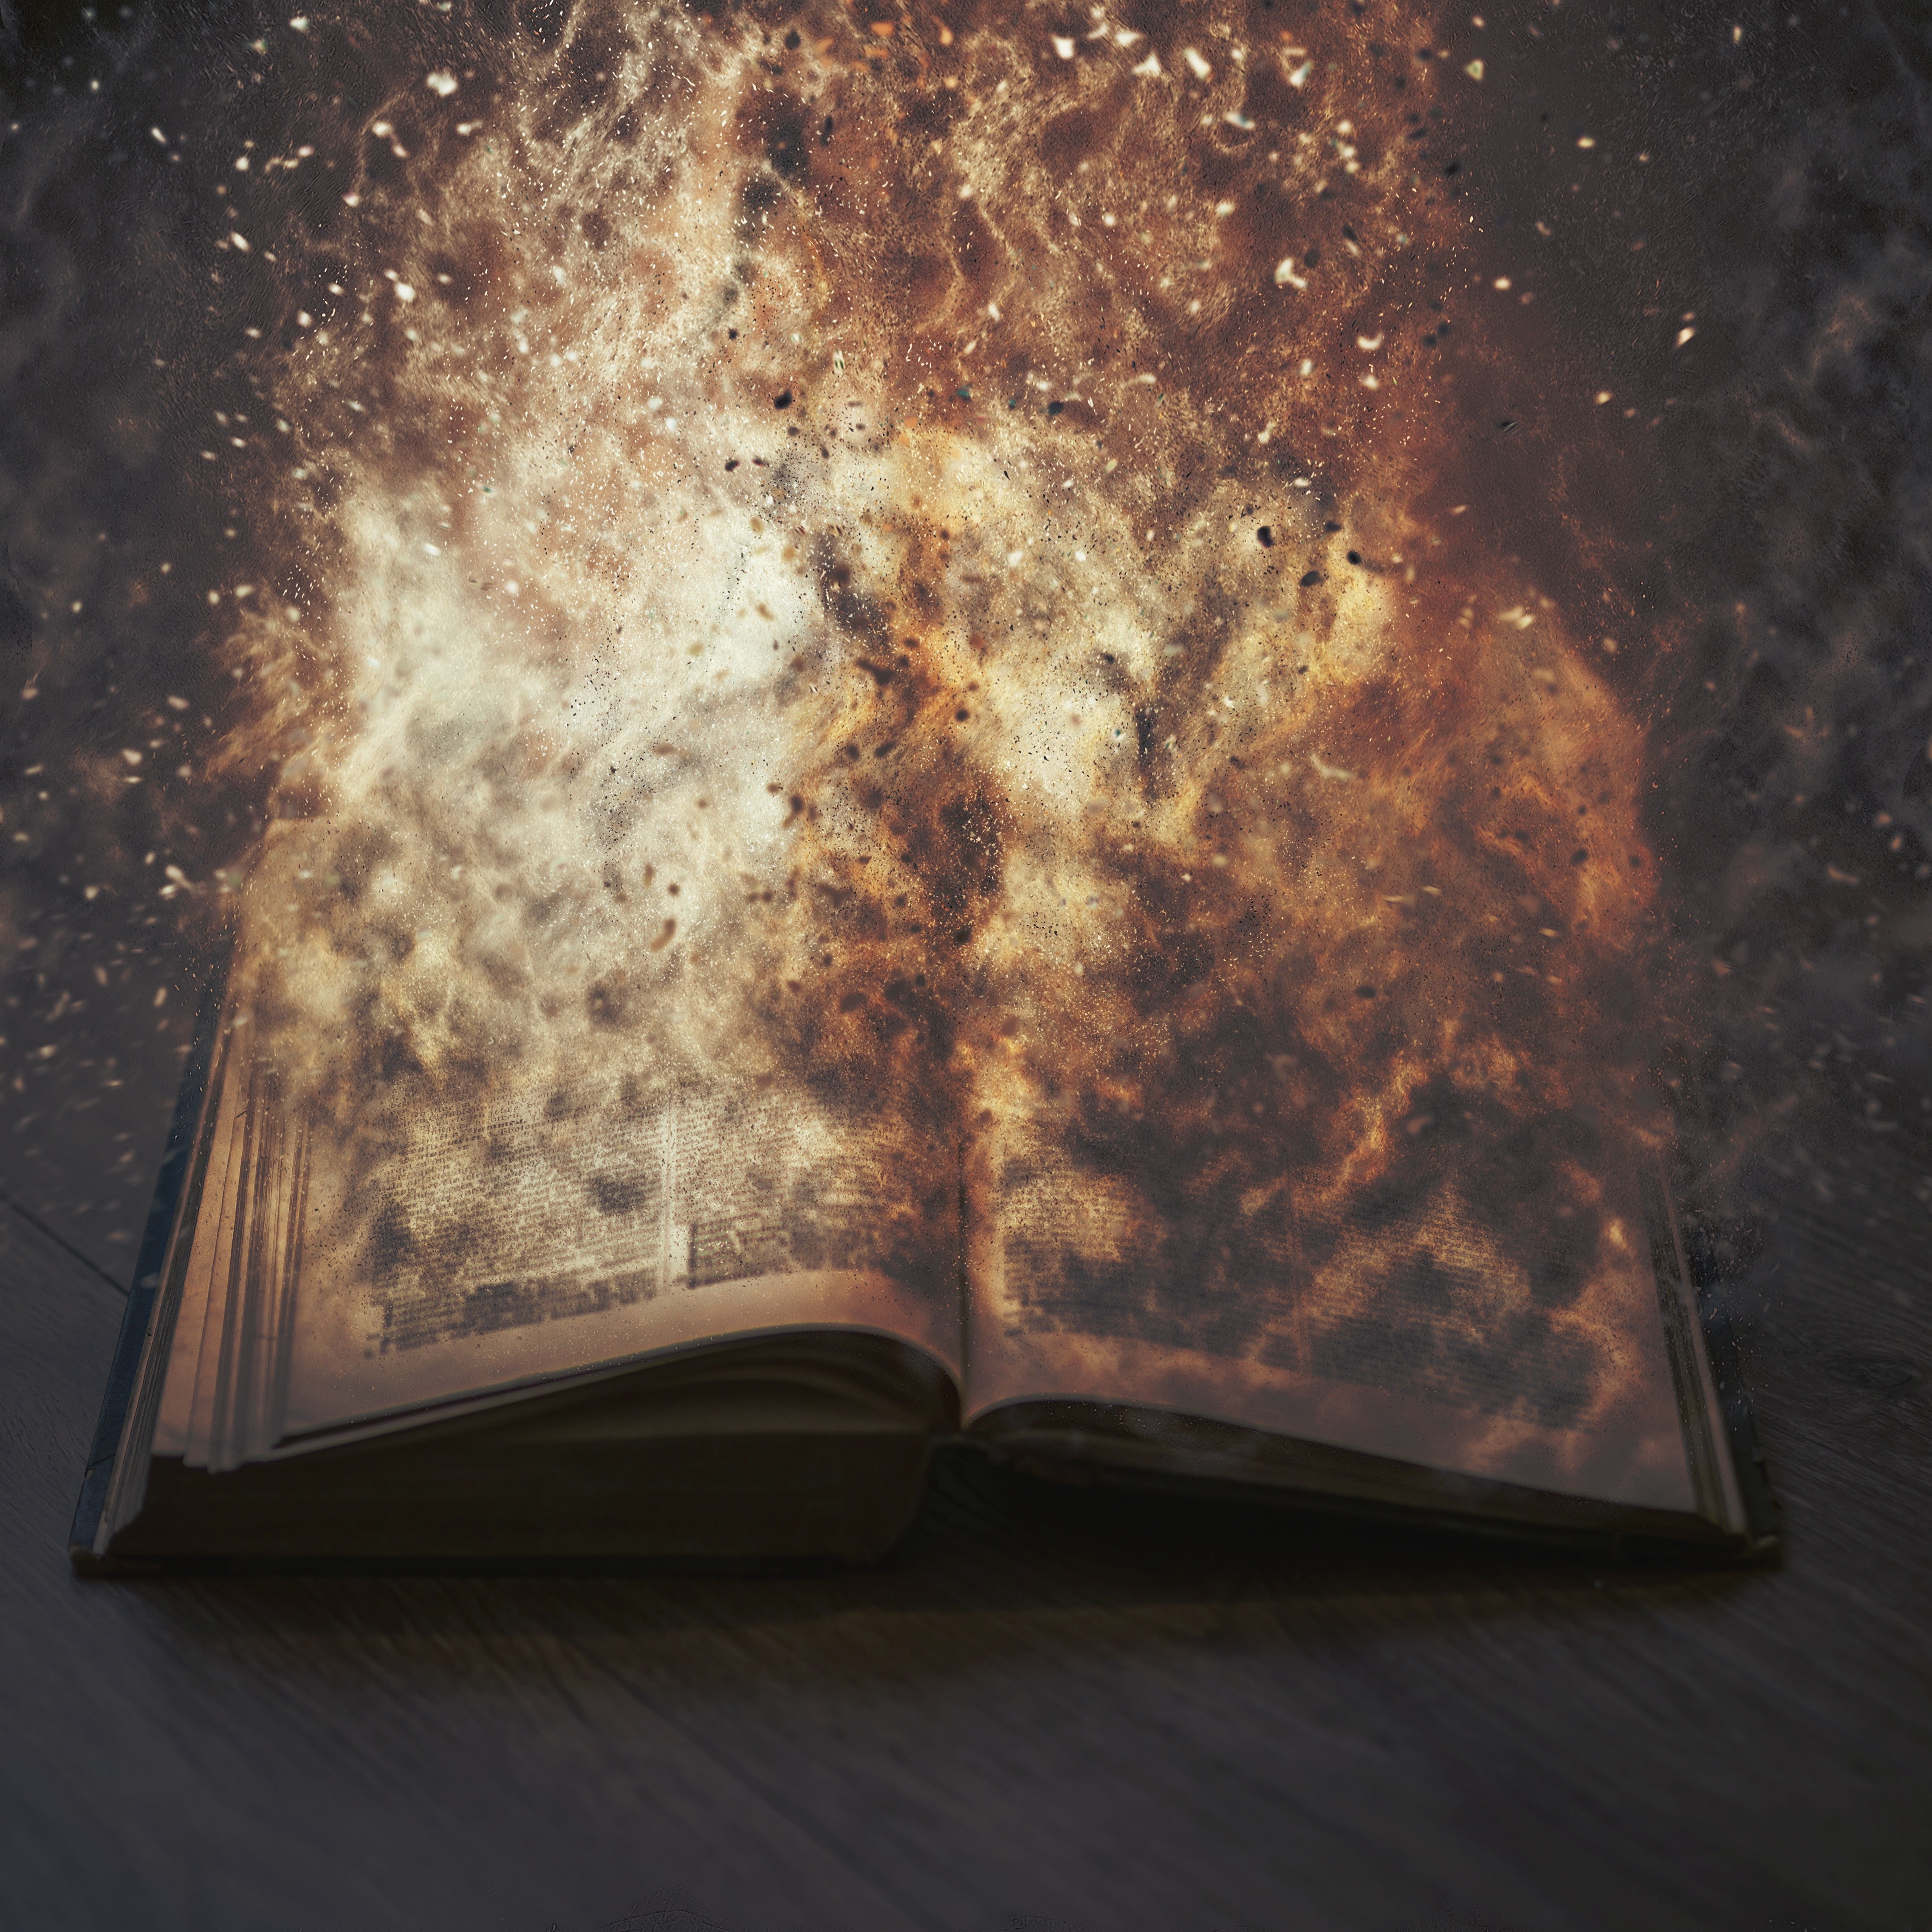 fire, books, photo manipulation, no people, indoors, publication